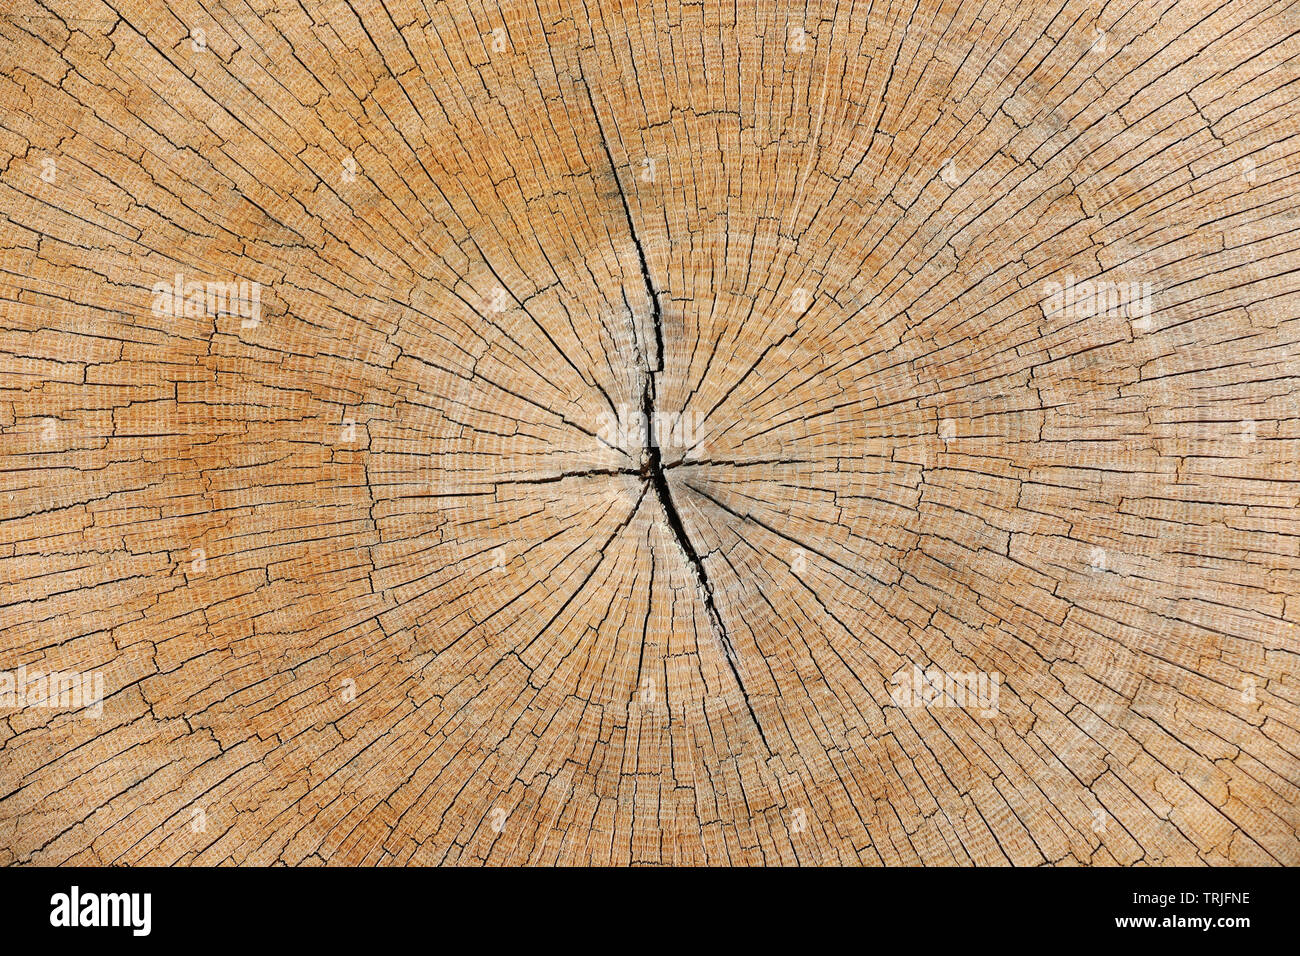 Freshly cut of tree texture. Section of old trunk with annual rings. Wooden abstract background. Old, cracked tree trunk, cross section wood Stock Photo